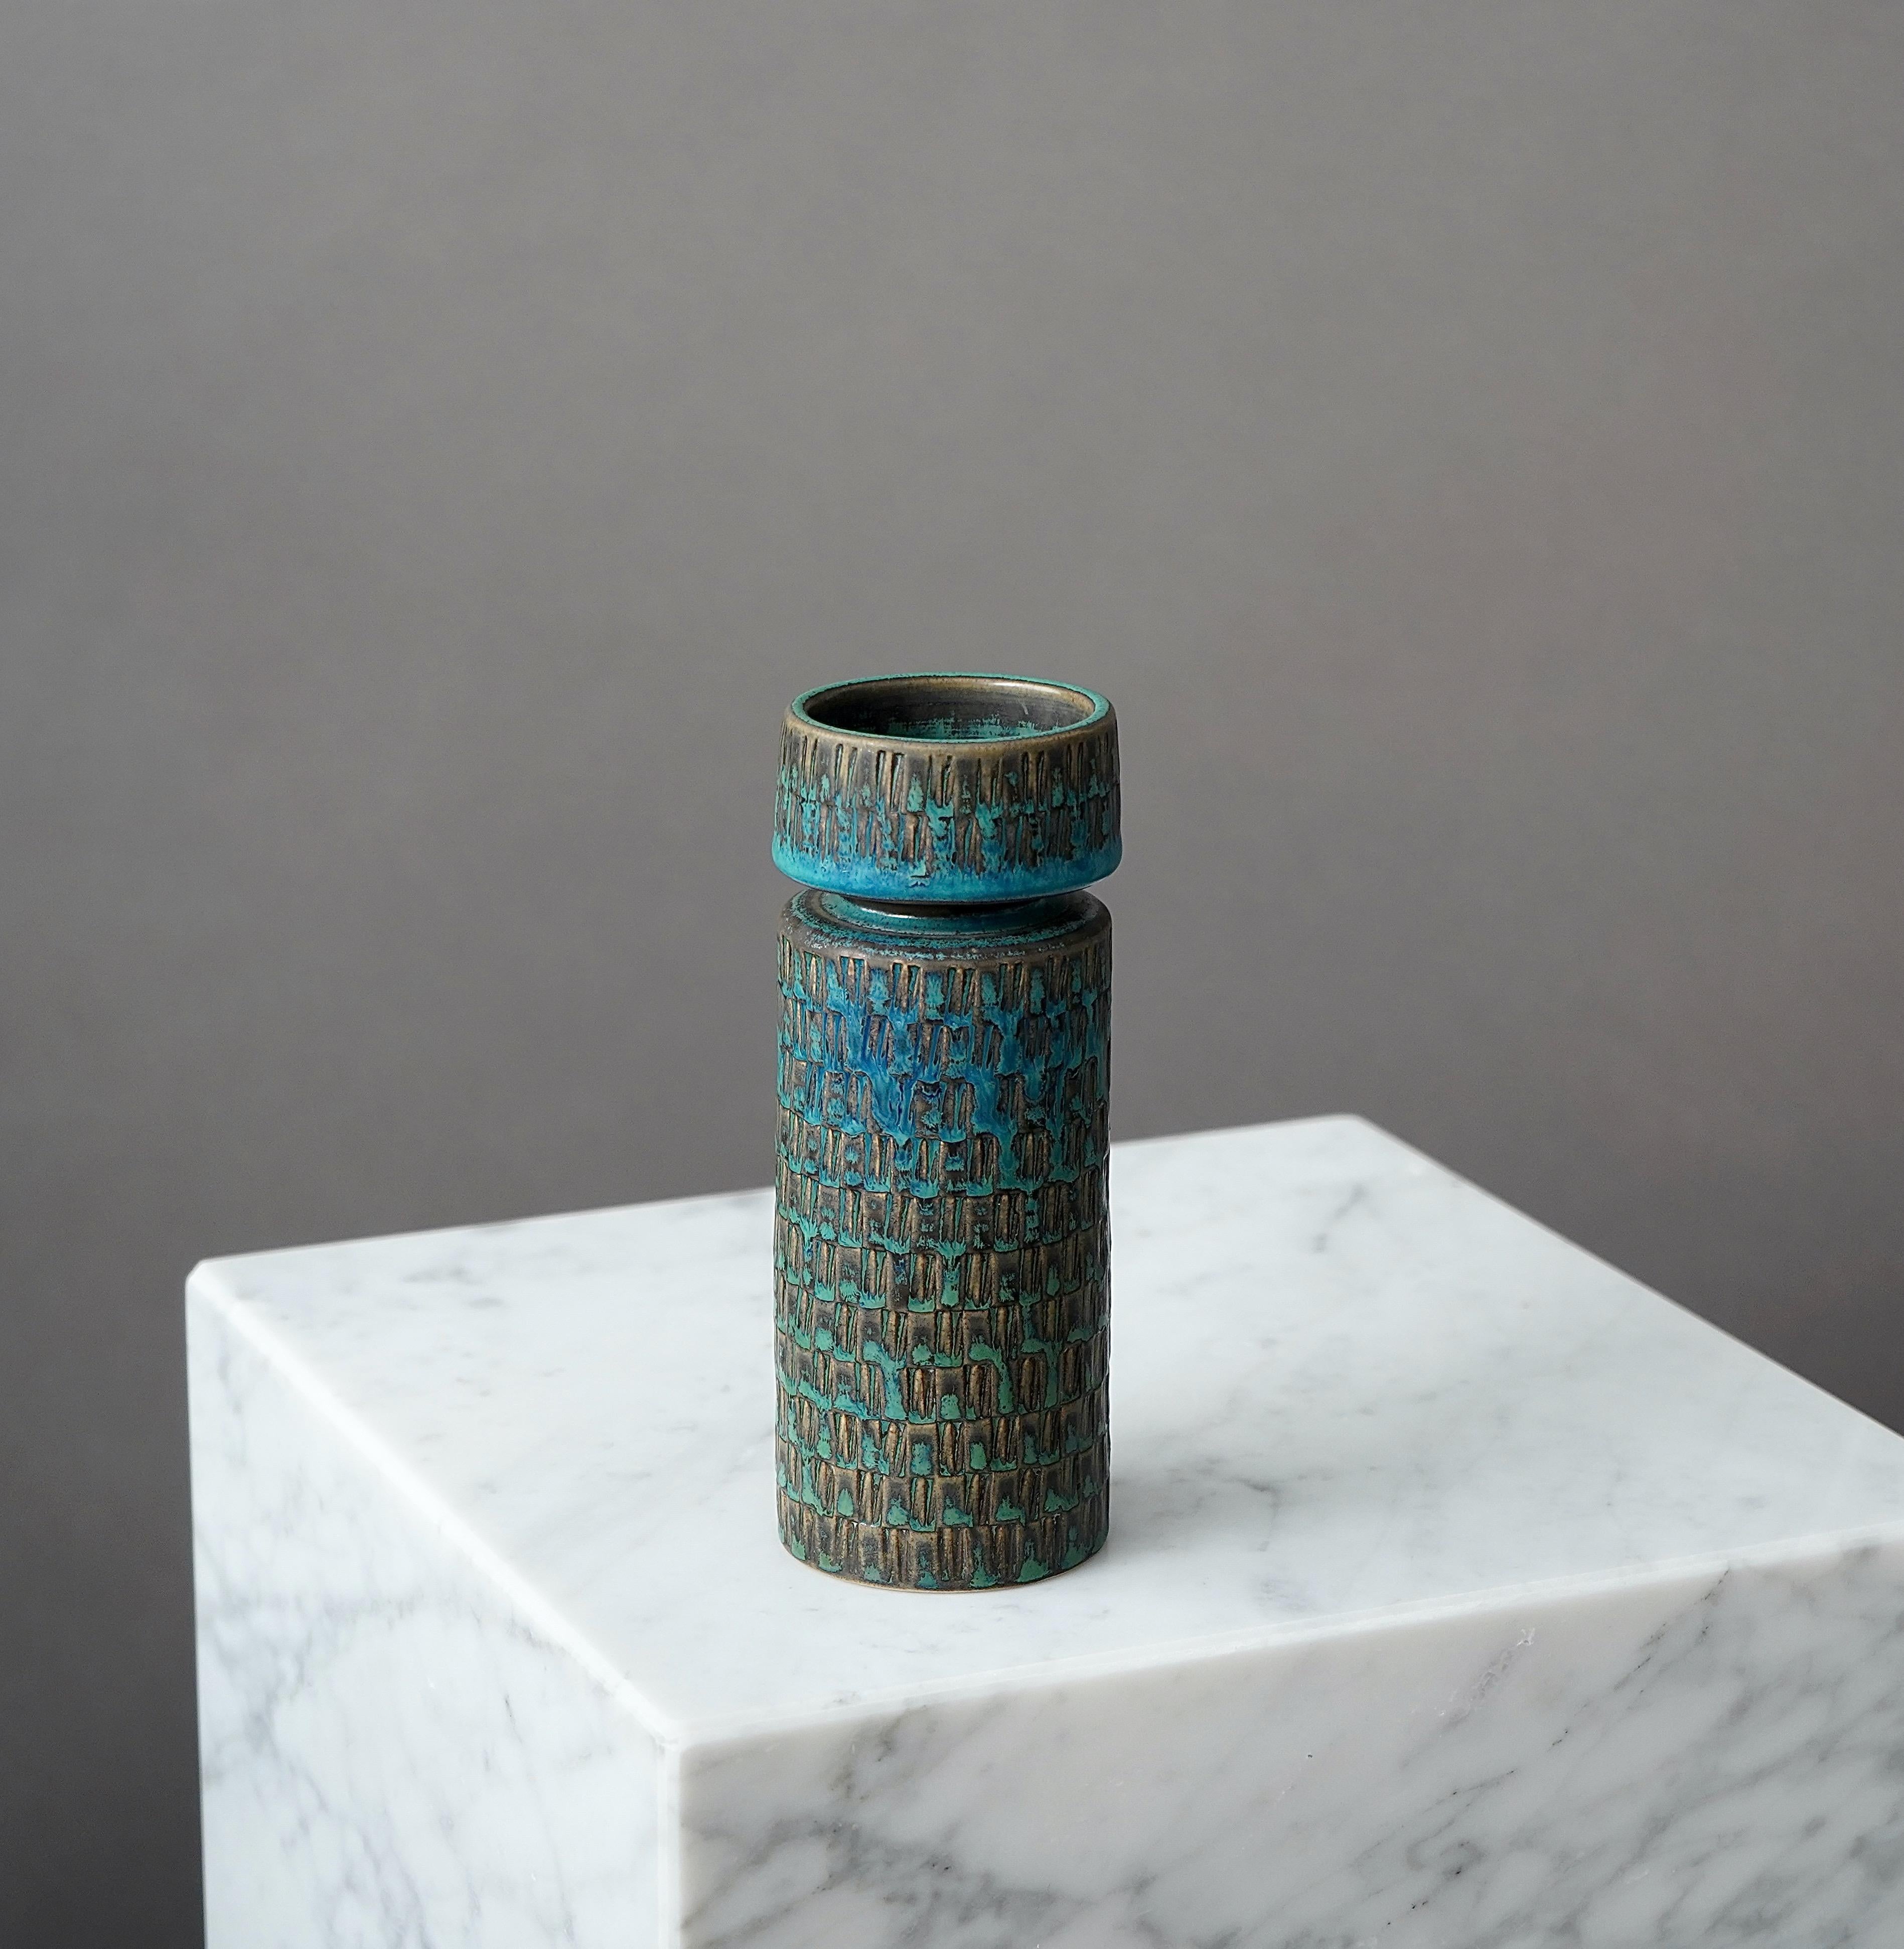 A beautiful and unique stoneware vase with amazing glaze.
Made by Stig Lindberg in Gustavsberg Studio, Sweden, 1962.

Excellent condition.
Incised 